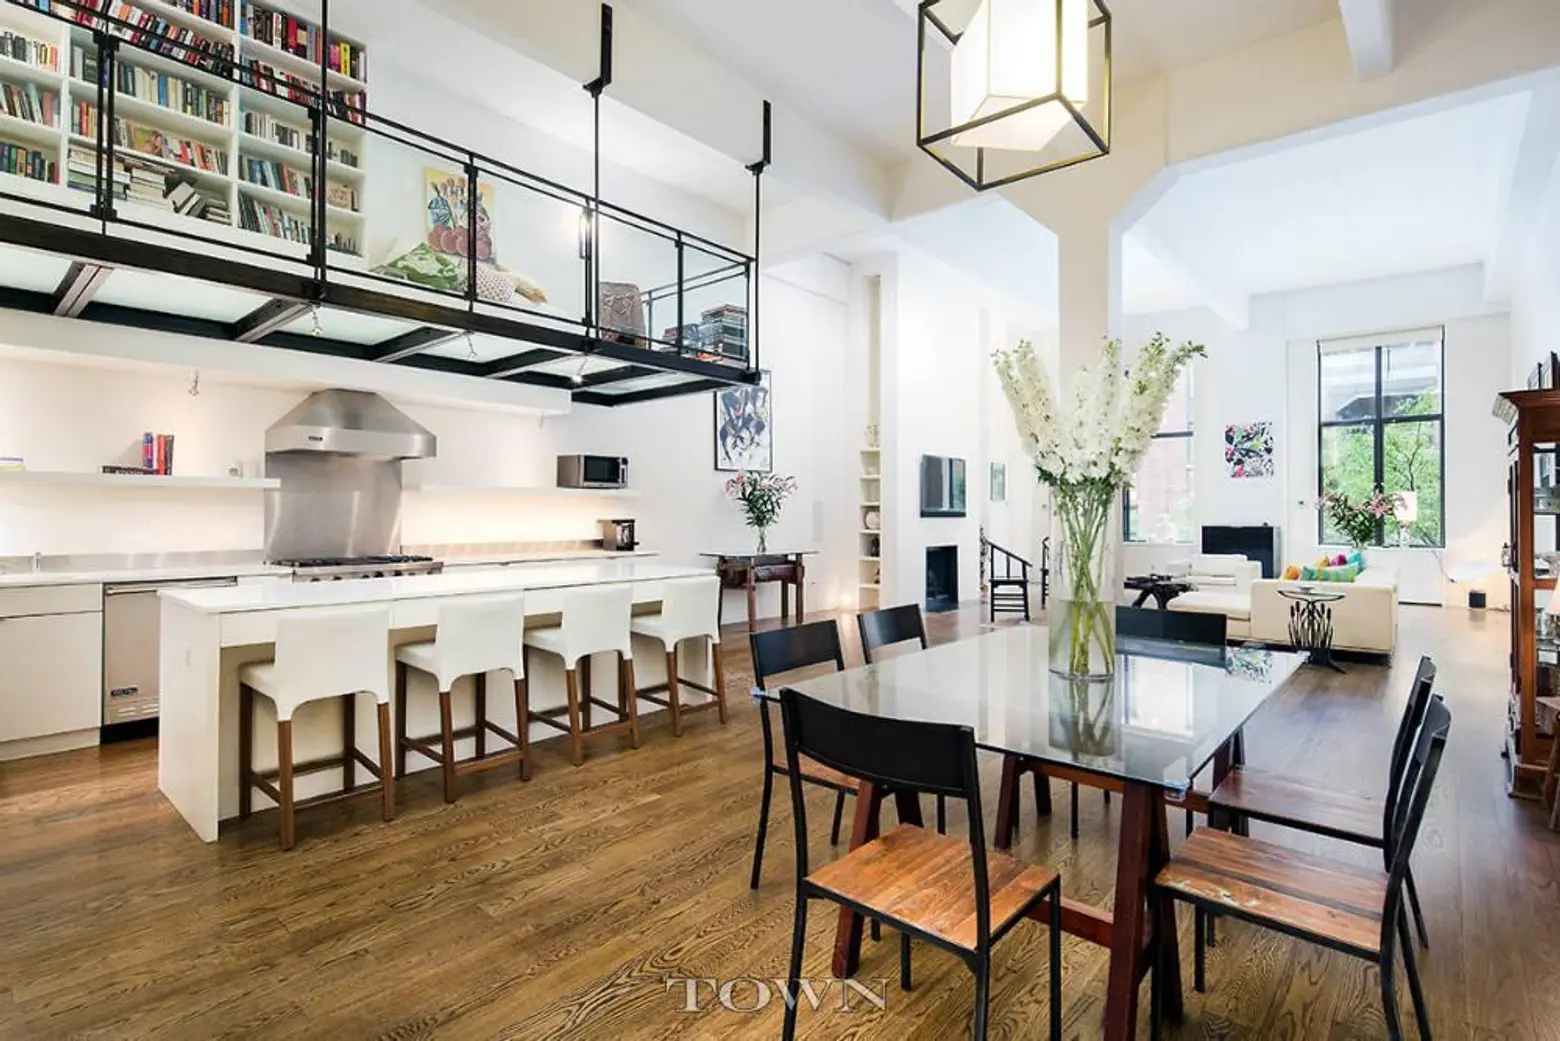 This $5.5M West Village Pad Has a Glass Catwalk and Will Make Your Frienemies Very Jealous